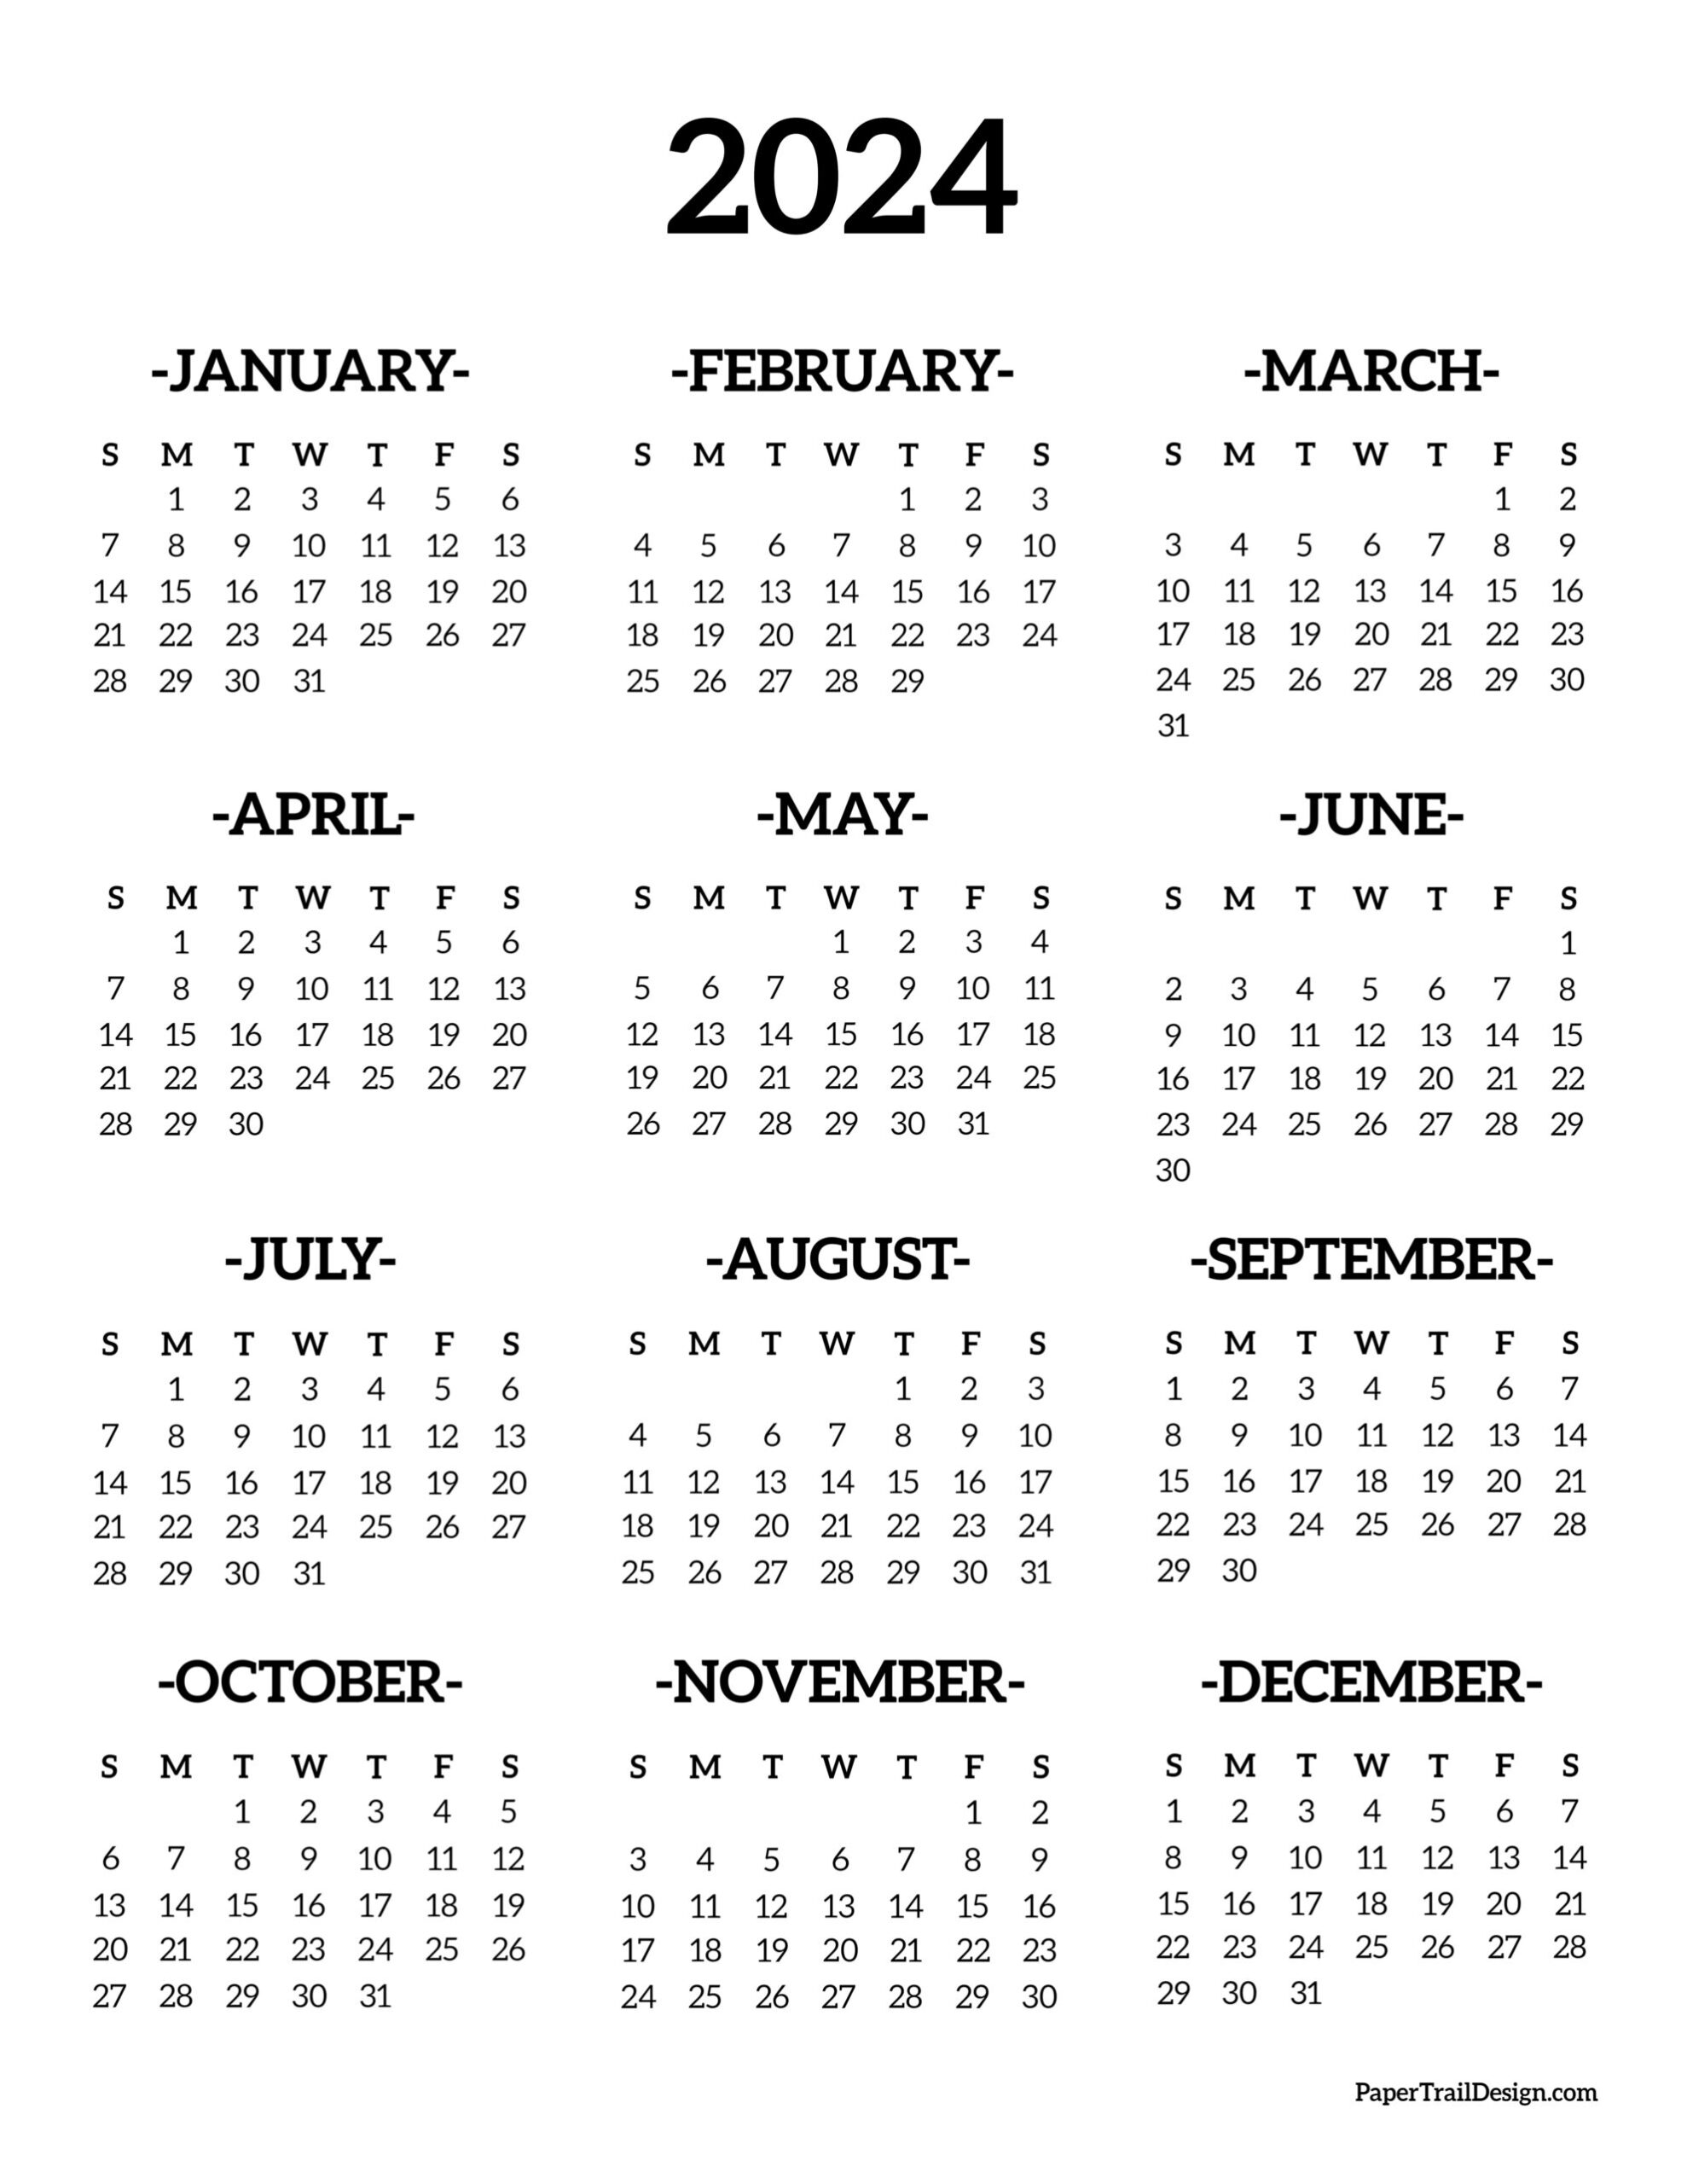 Calendar 2024 Printable One Page - Paper Trail Design for 2024 Yearly Calendar Printable